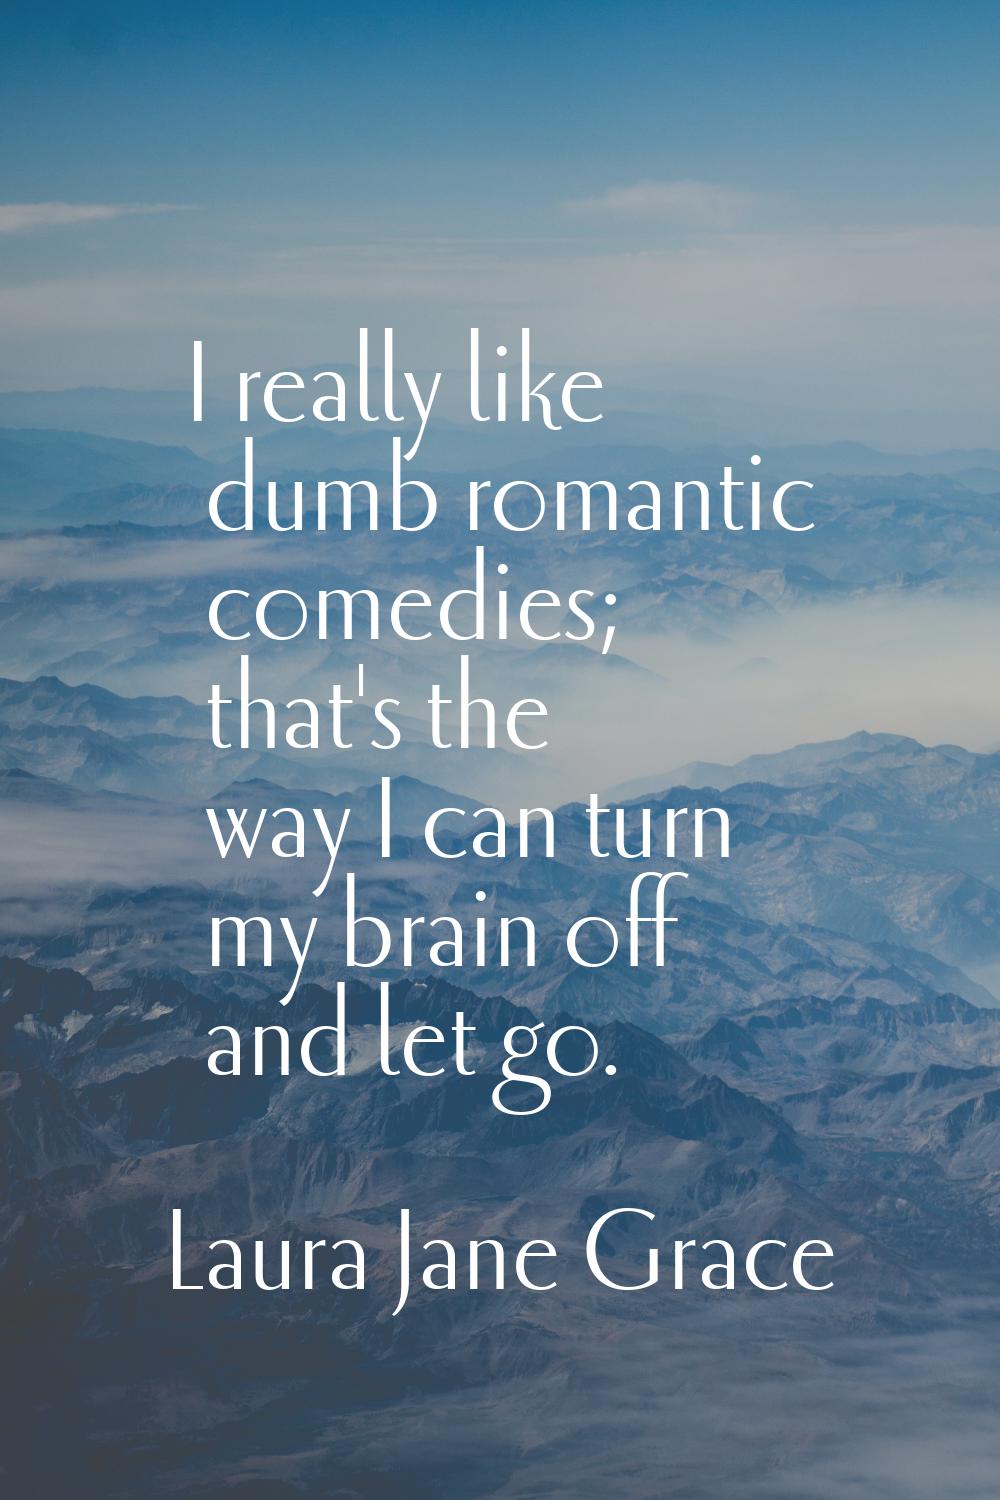 I really like dumb romantic comedies; that's the way I can turn my brain off and let go.